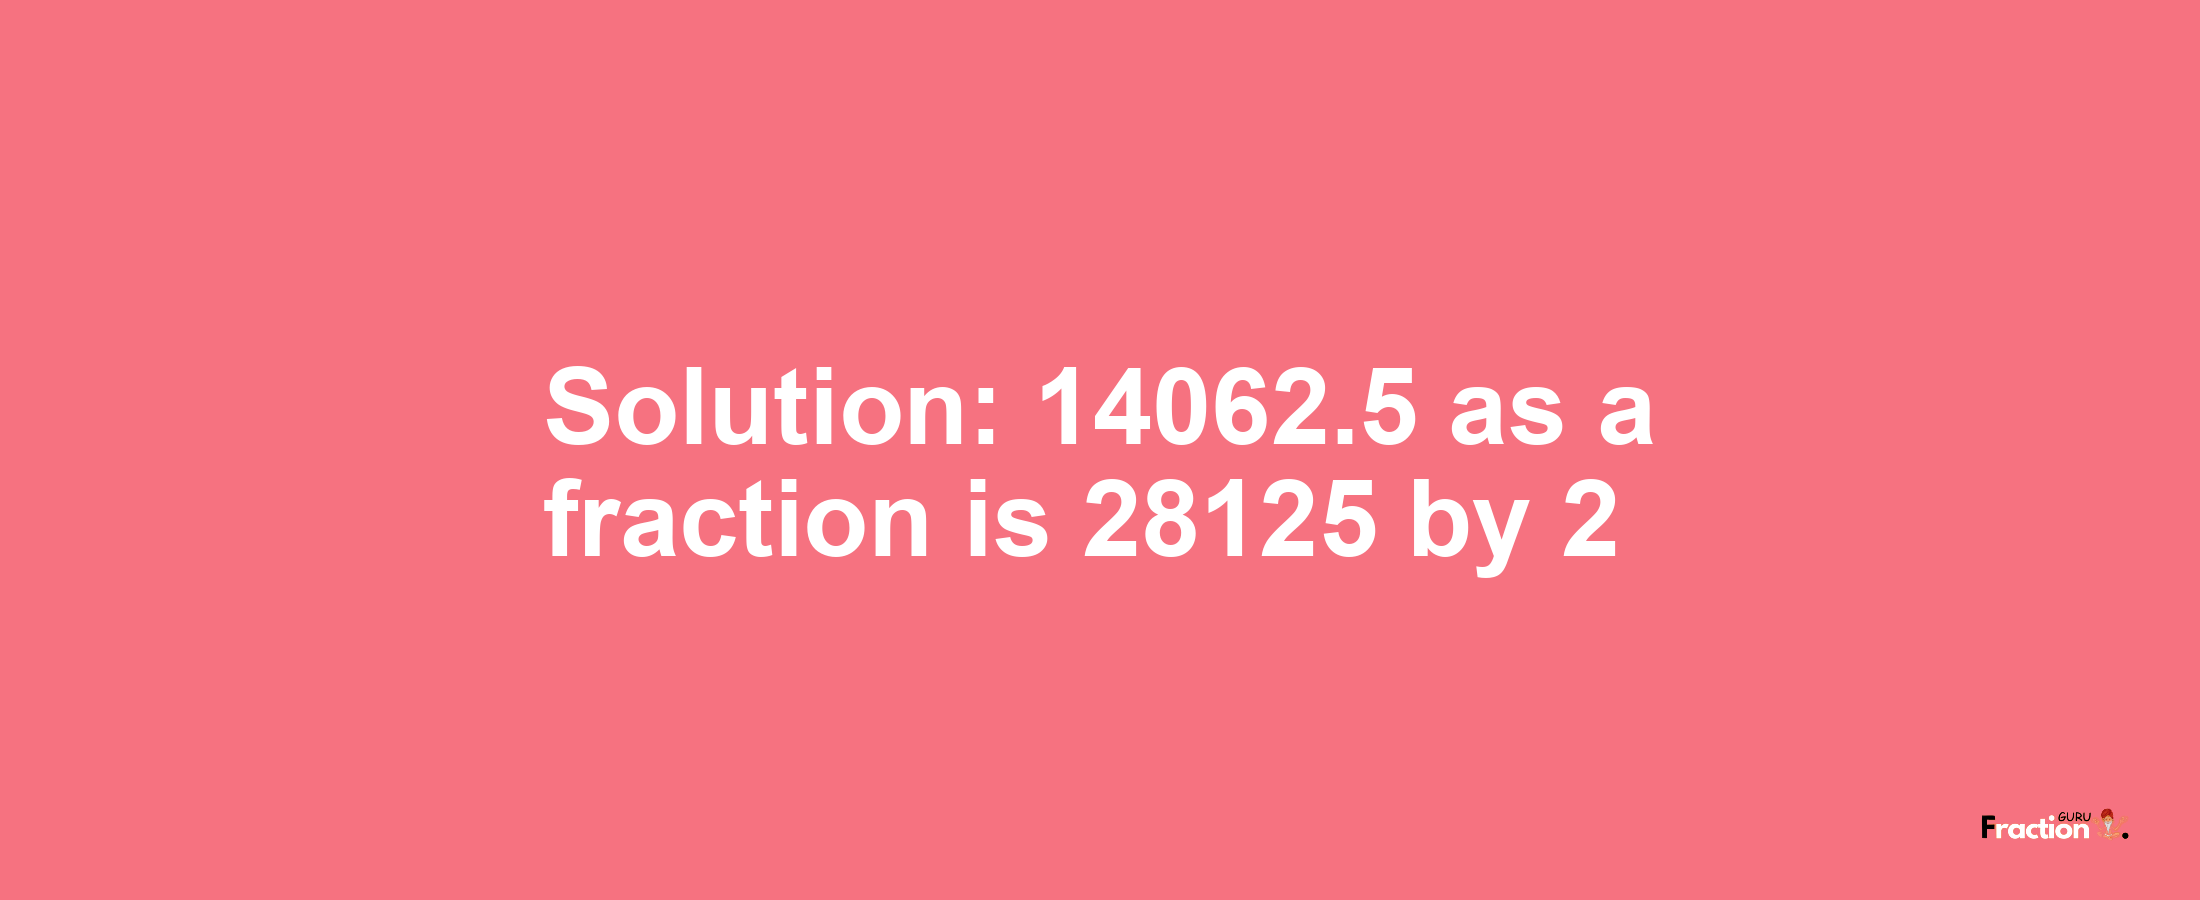 Solution:14062.5 as a fraction is 28125/2